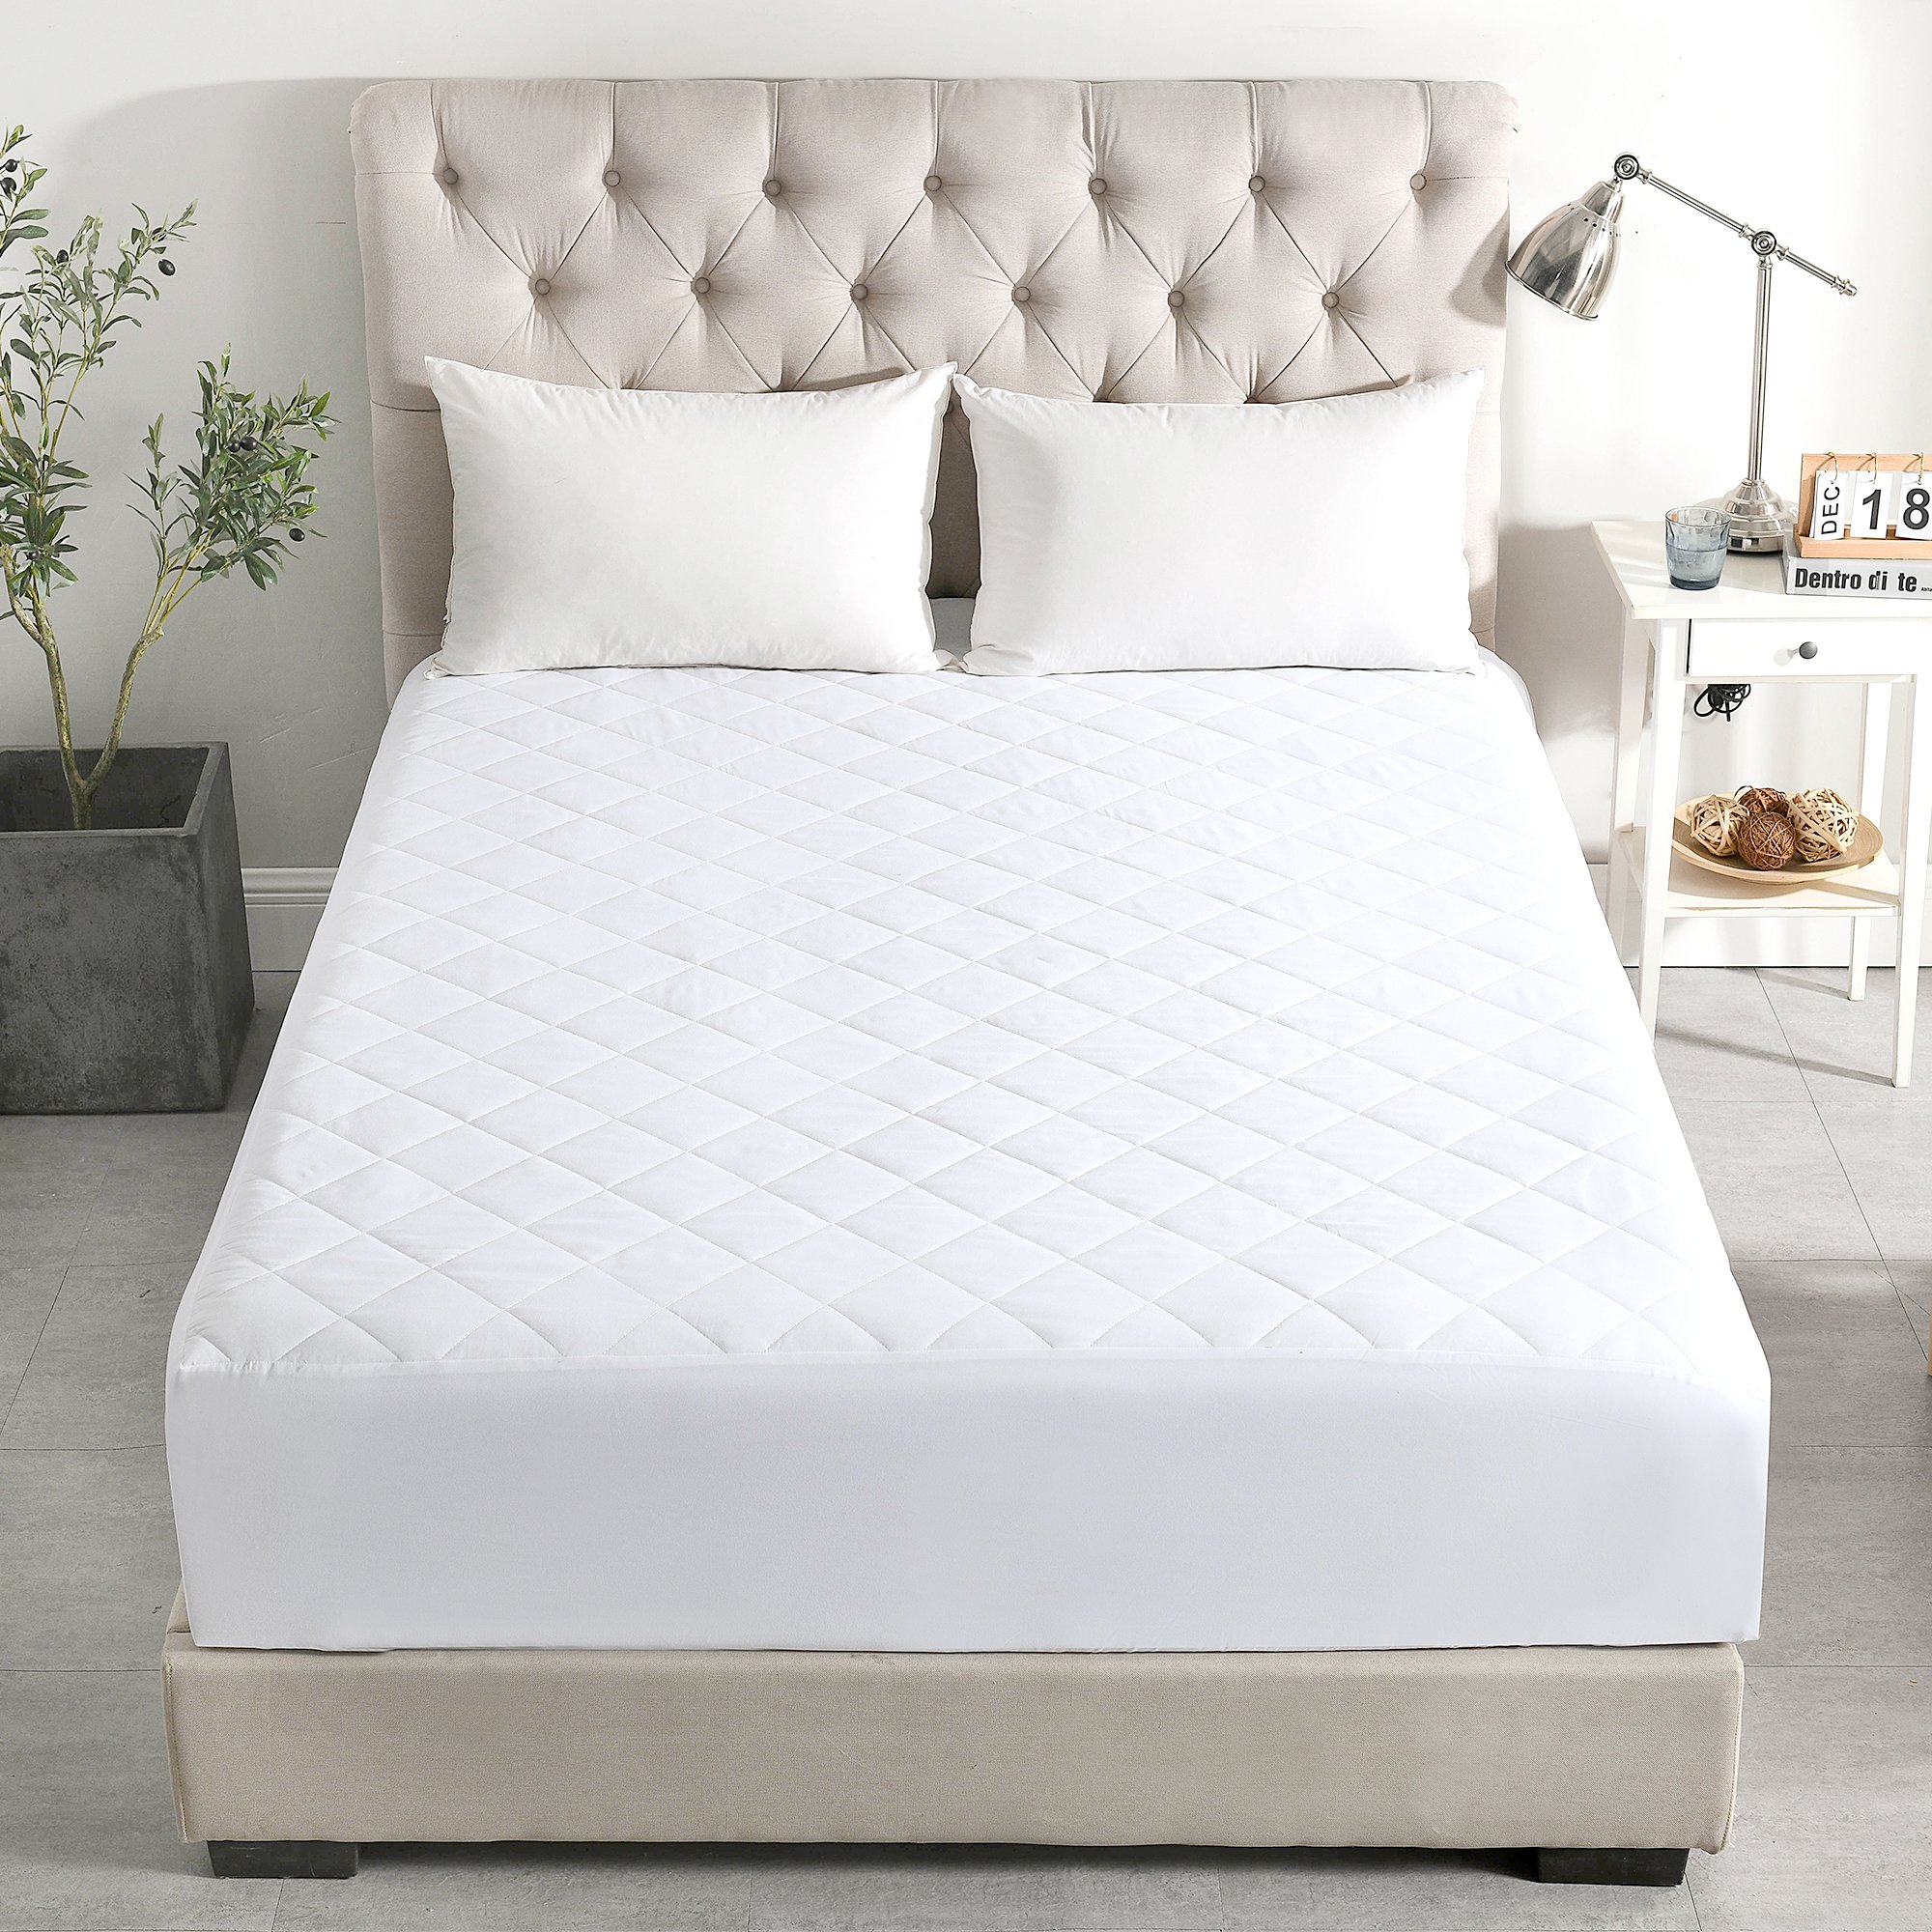 Soft Breathable Mattress Pad Cover, Diamond Quilted with ...